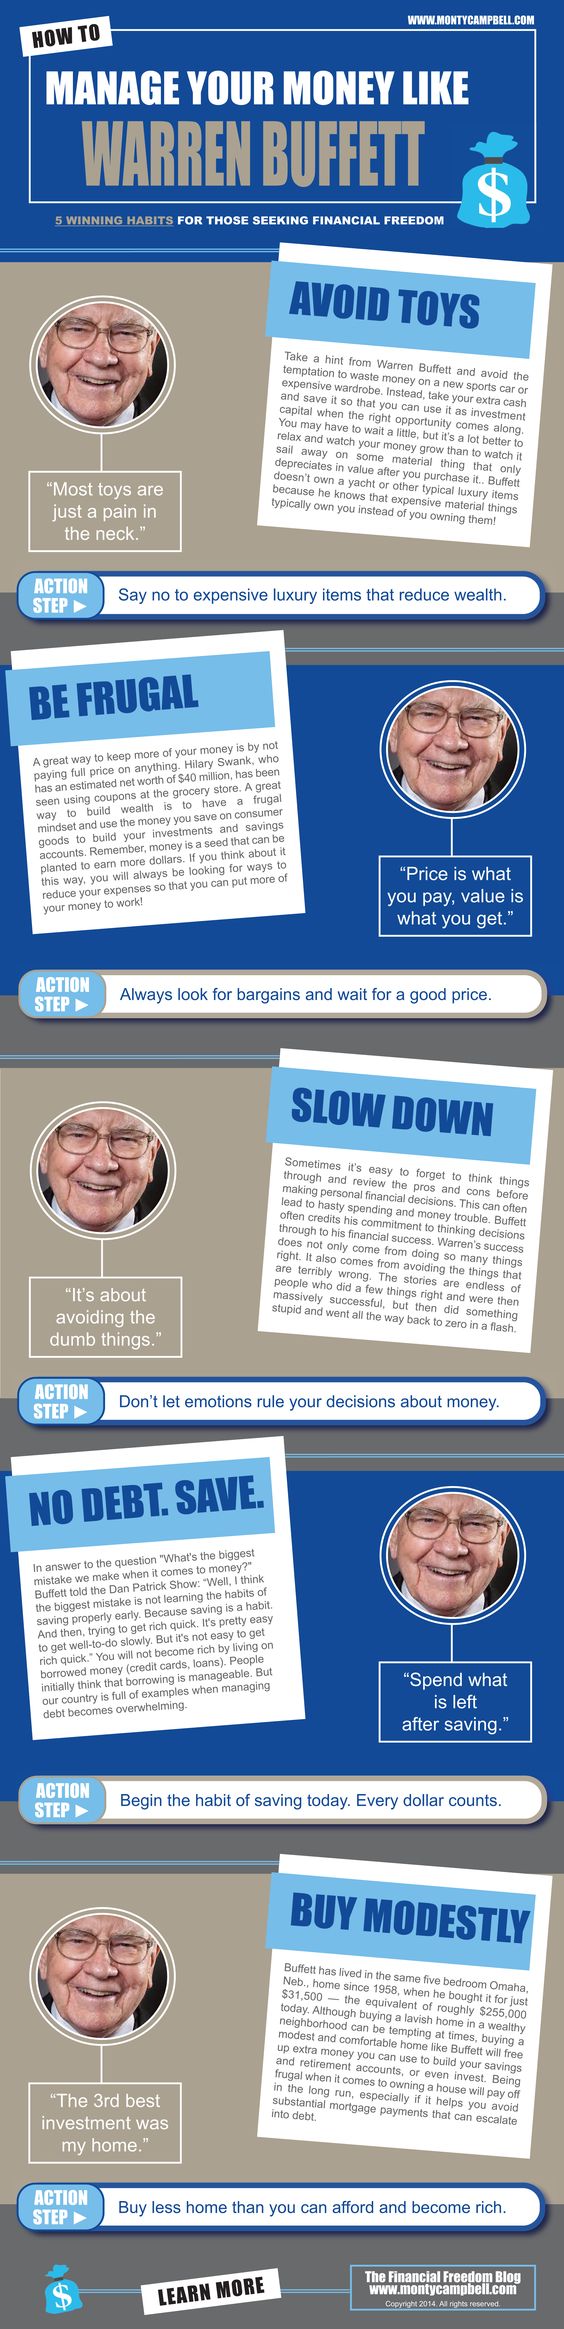 How to manage your money like warren buffett infographic quotes